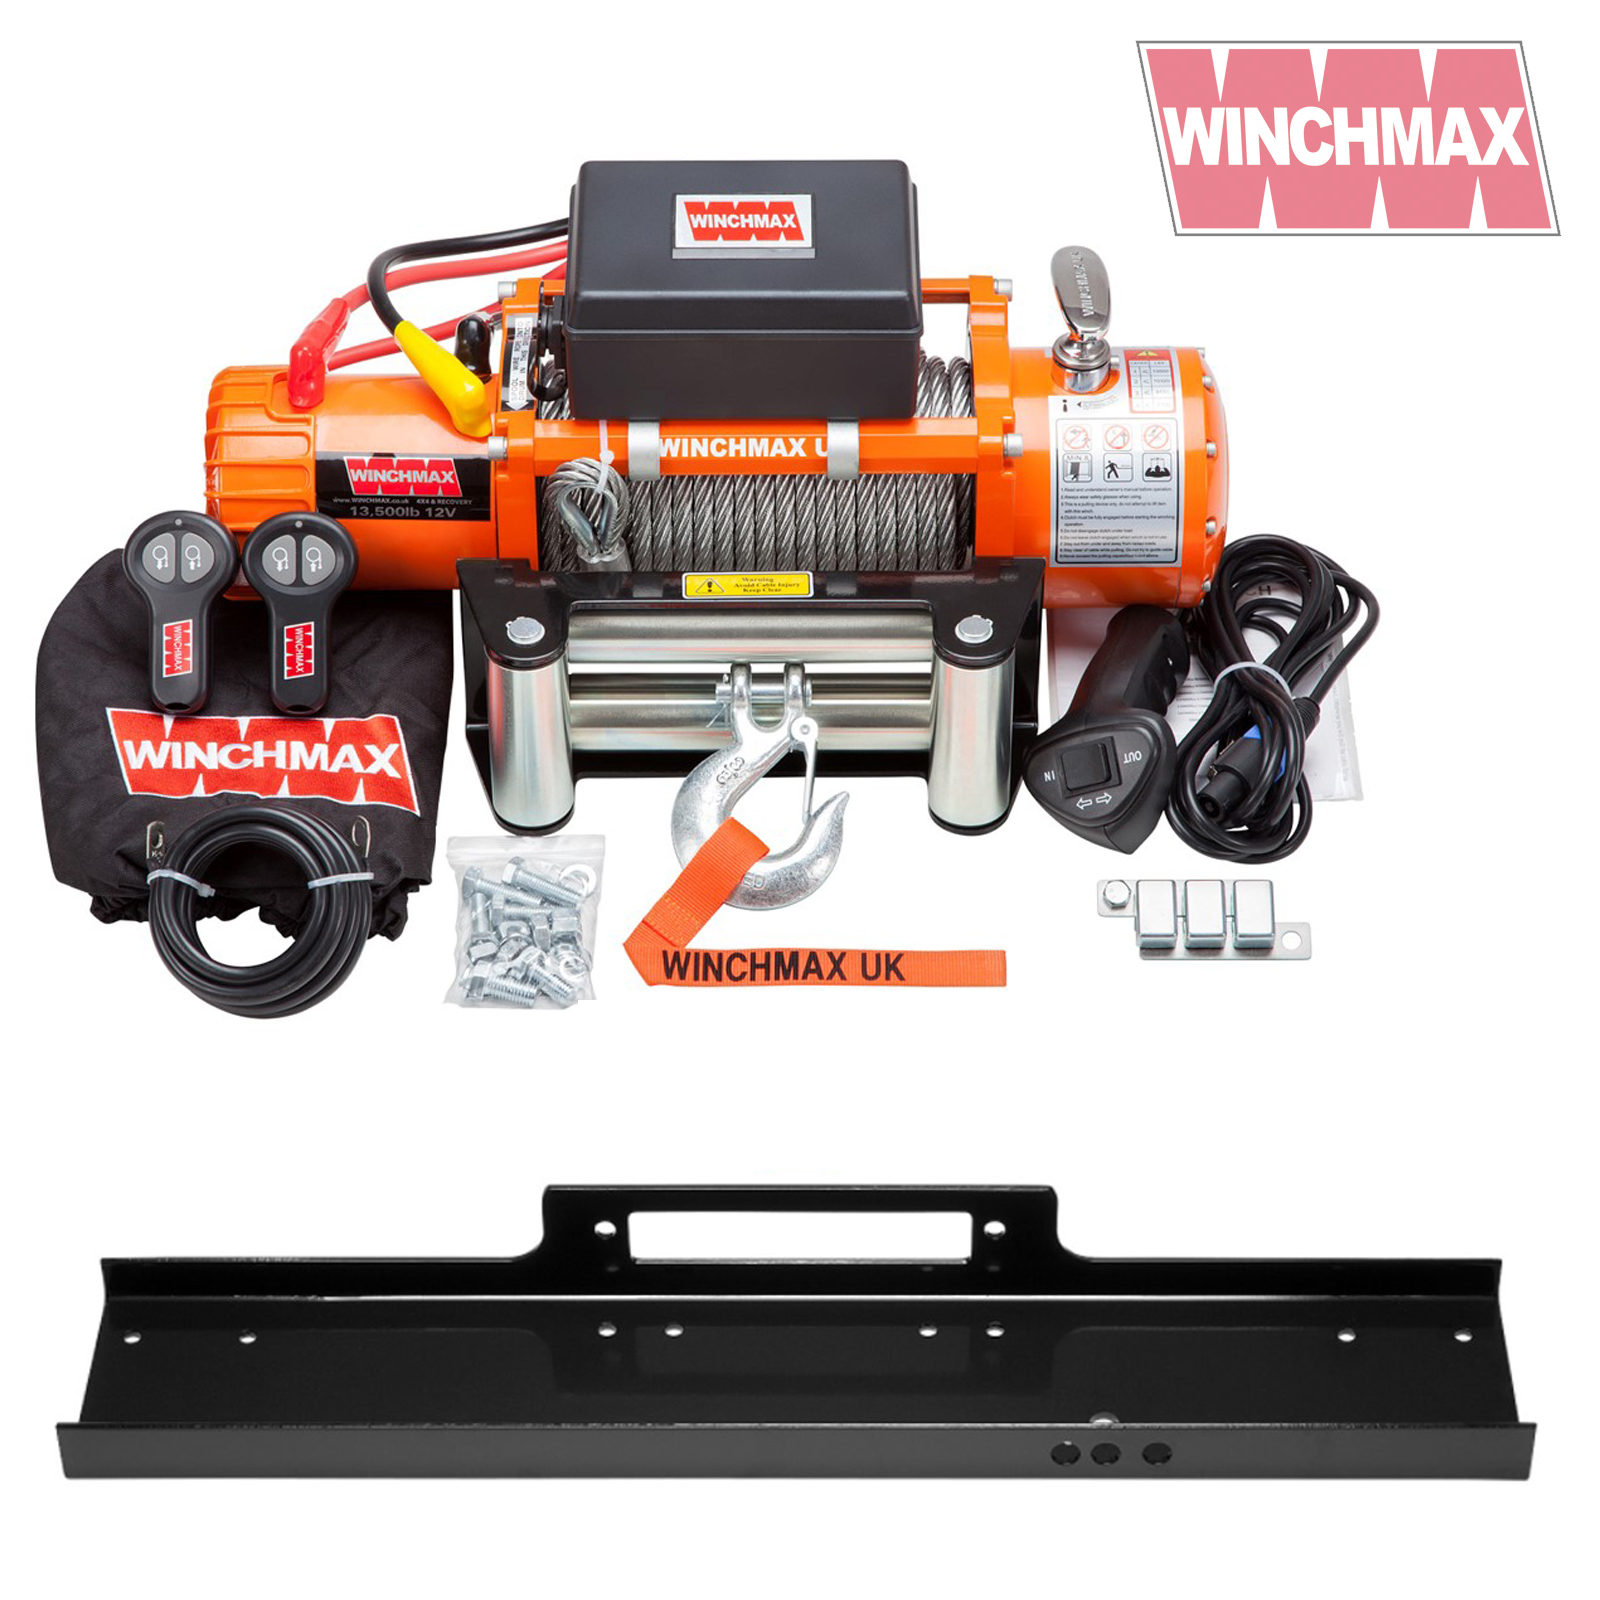 Winchmax 13500lb 12v Winch. Steel Rope. Flat Bed Mounting Plate. Twin Remote Controls